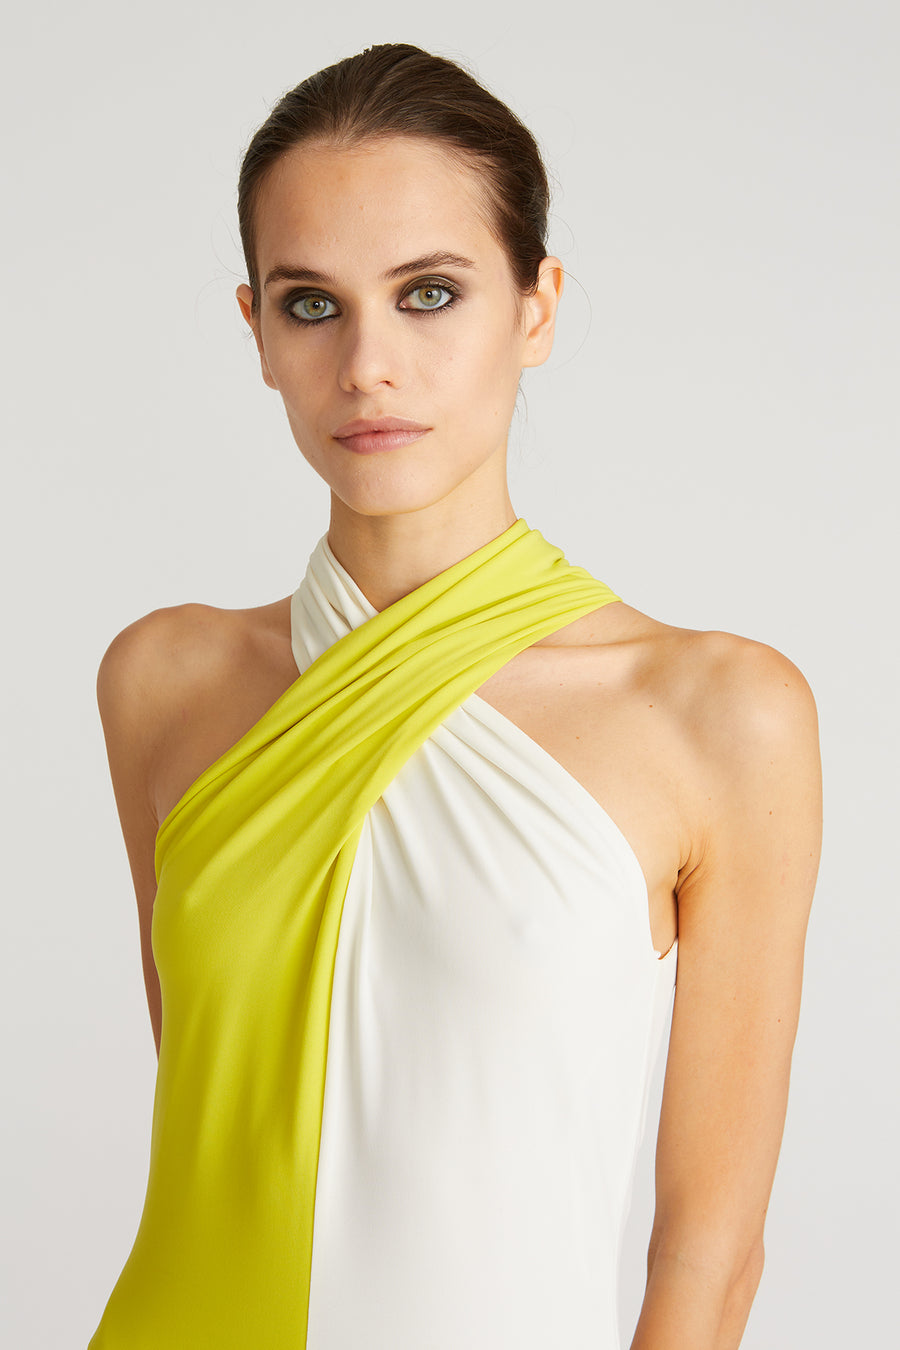 Dian Draped Jersey Gown